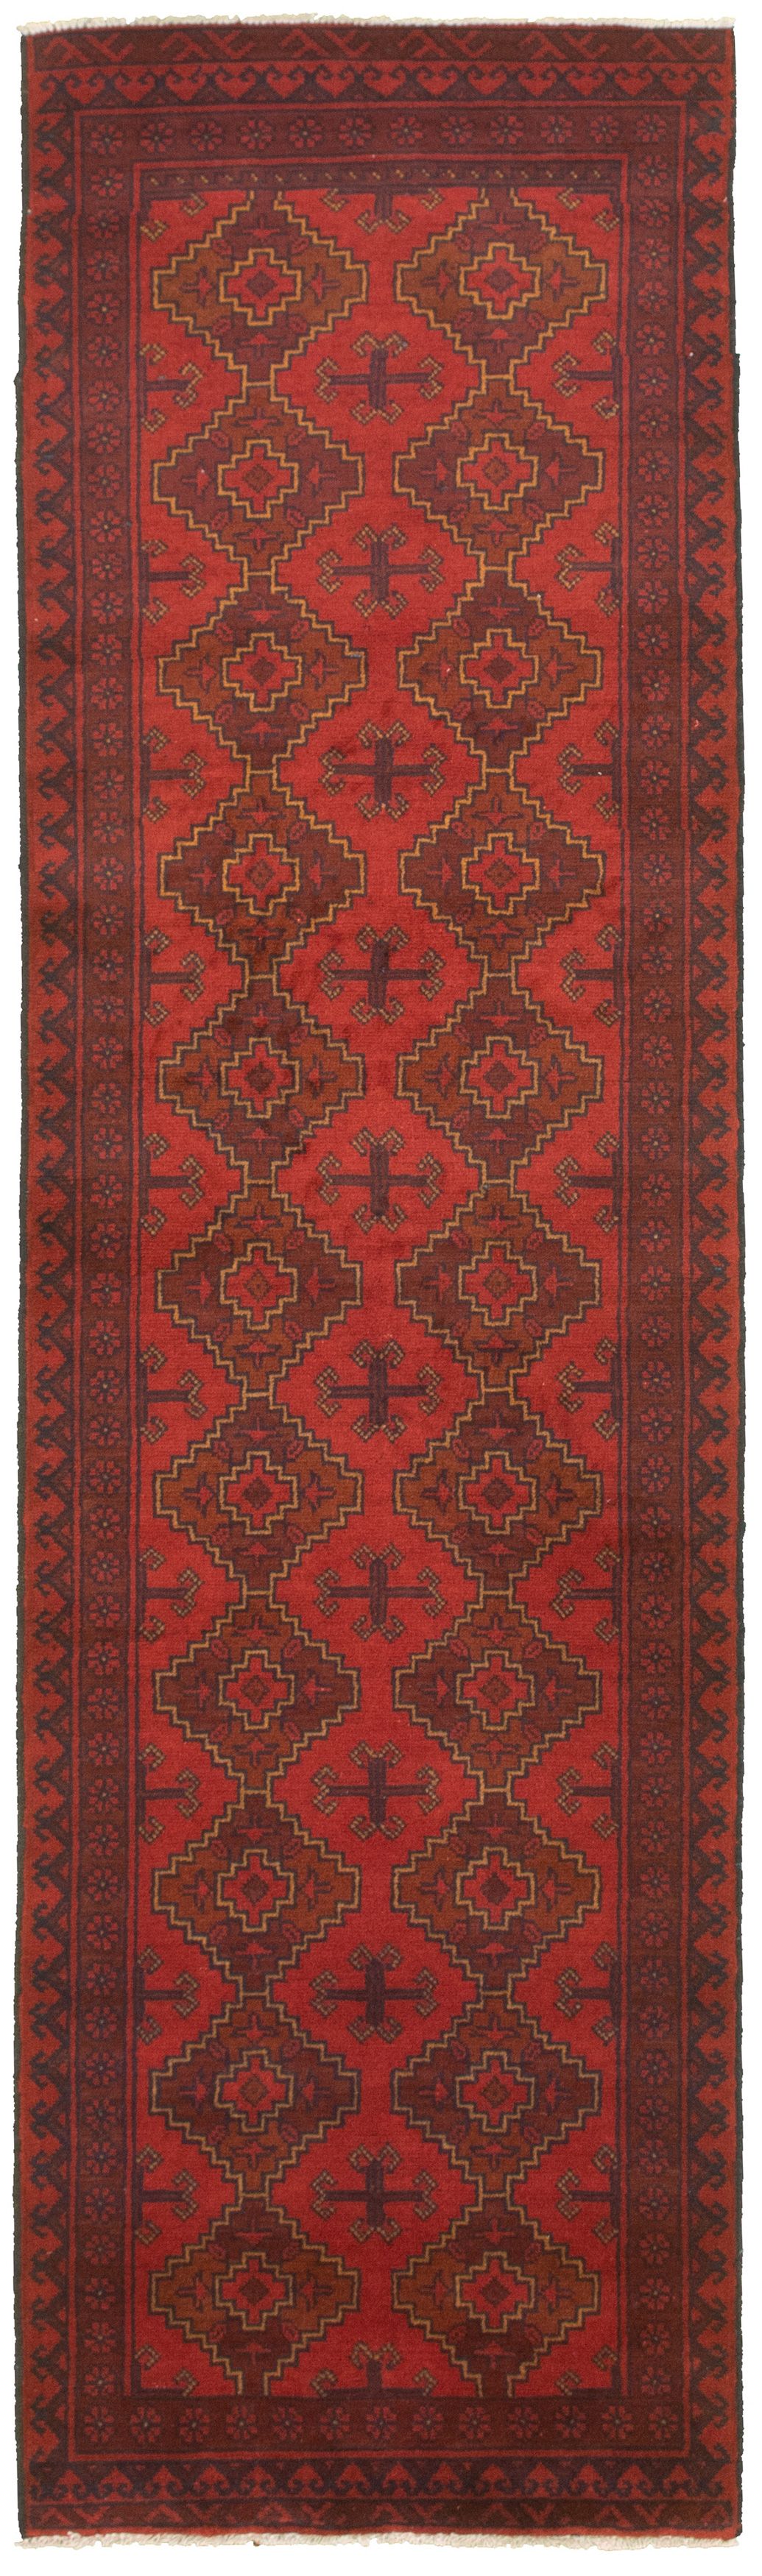 Hand-knotted Finest Khal Mohammadi Red  Rug 2'6" x 9'5" Size: 2'6" x 9'5"  